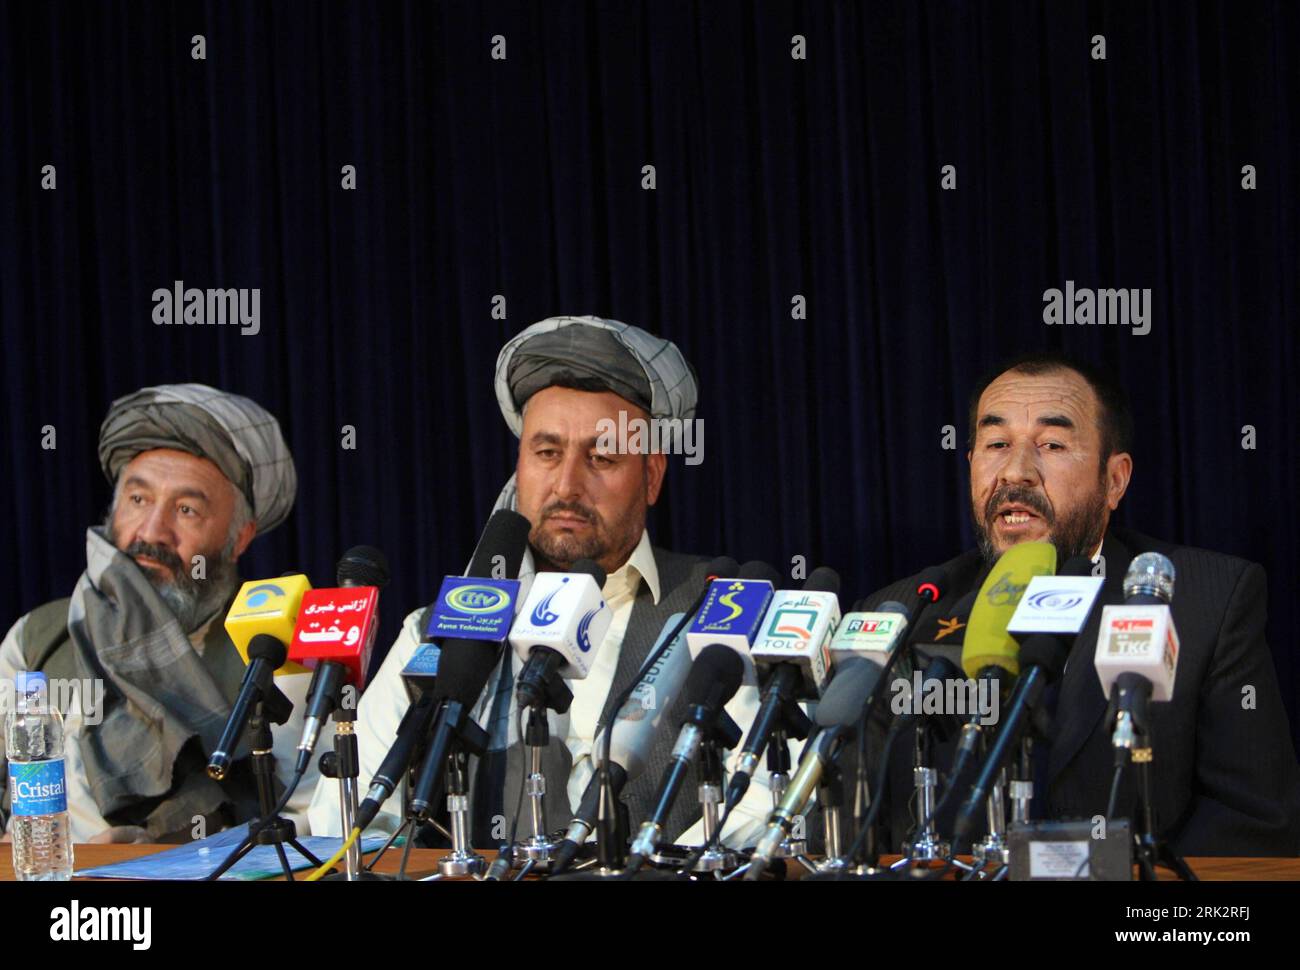 Bildnummer: 53238186  Datum: 03.08.2009  Copyright: imago/Xinhua (090803) -- KABUL, Aug. 3, 2009 (Xinhua) -- Presidential candidate Abdul Majid Samim (R) speaks during a press conference in Kabul, capital of Afghanistan, Aug. 3, 2009. Samim withdrew from the presidential election in favor of incumbent president and presidential candidate Hamid Karzai on Monday. He is the third out of 41 presidential candidates who withdrew in favor of Karzai.     (Xinhua/Zabi Tamanna)(zx) (2)AFGHANISTAN-KABUL-ELECTION-CANDIDATE-WITHDRAWAL  PUBLICATIONxNOTxINxCHN  People Politik kbdig xkg  2009 quer  premiumd o Stock Photo